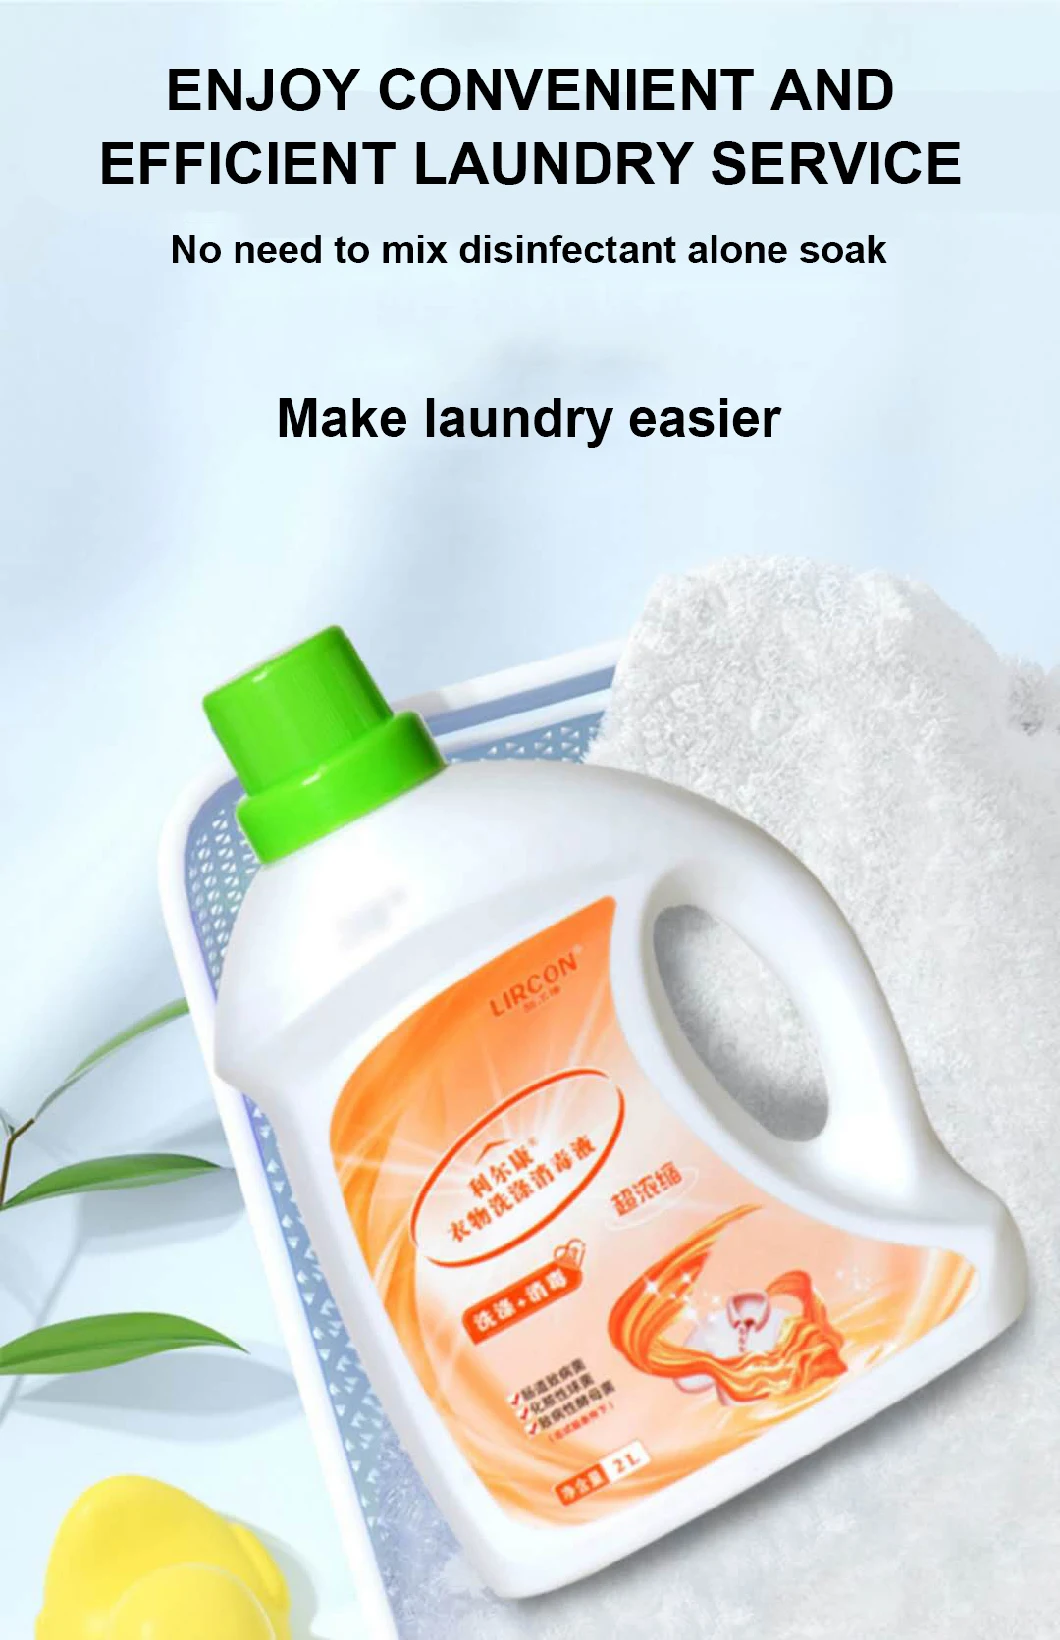 Factory Outlet Store Ultra Cleaning Laundry Detergent Bacteriostatic Laundry Detergent Liquid Disinfectant